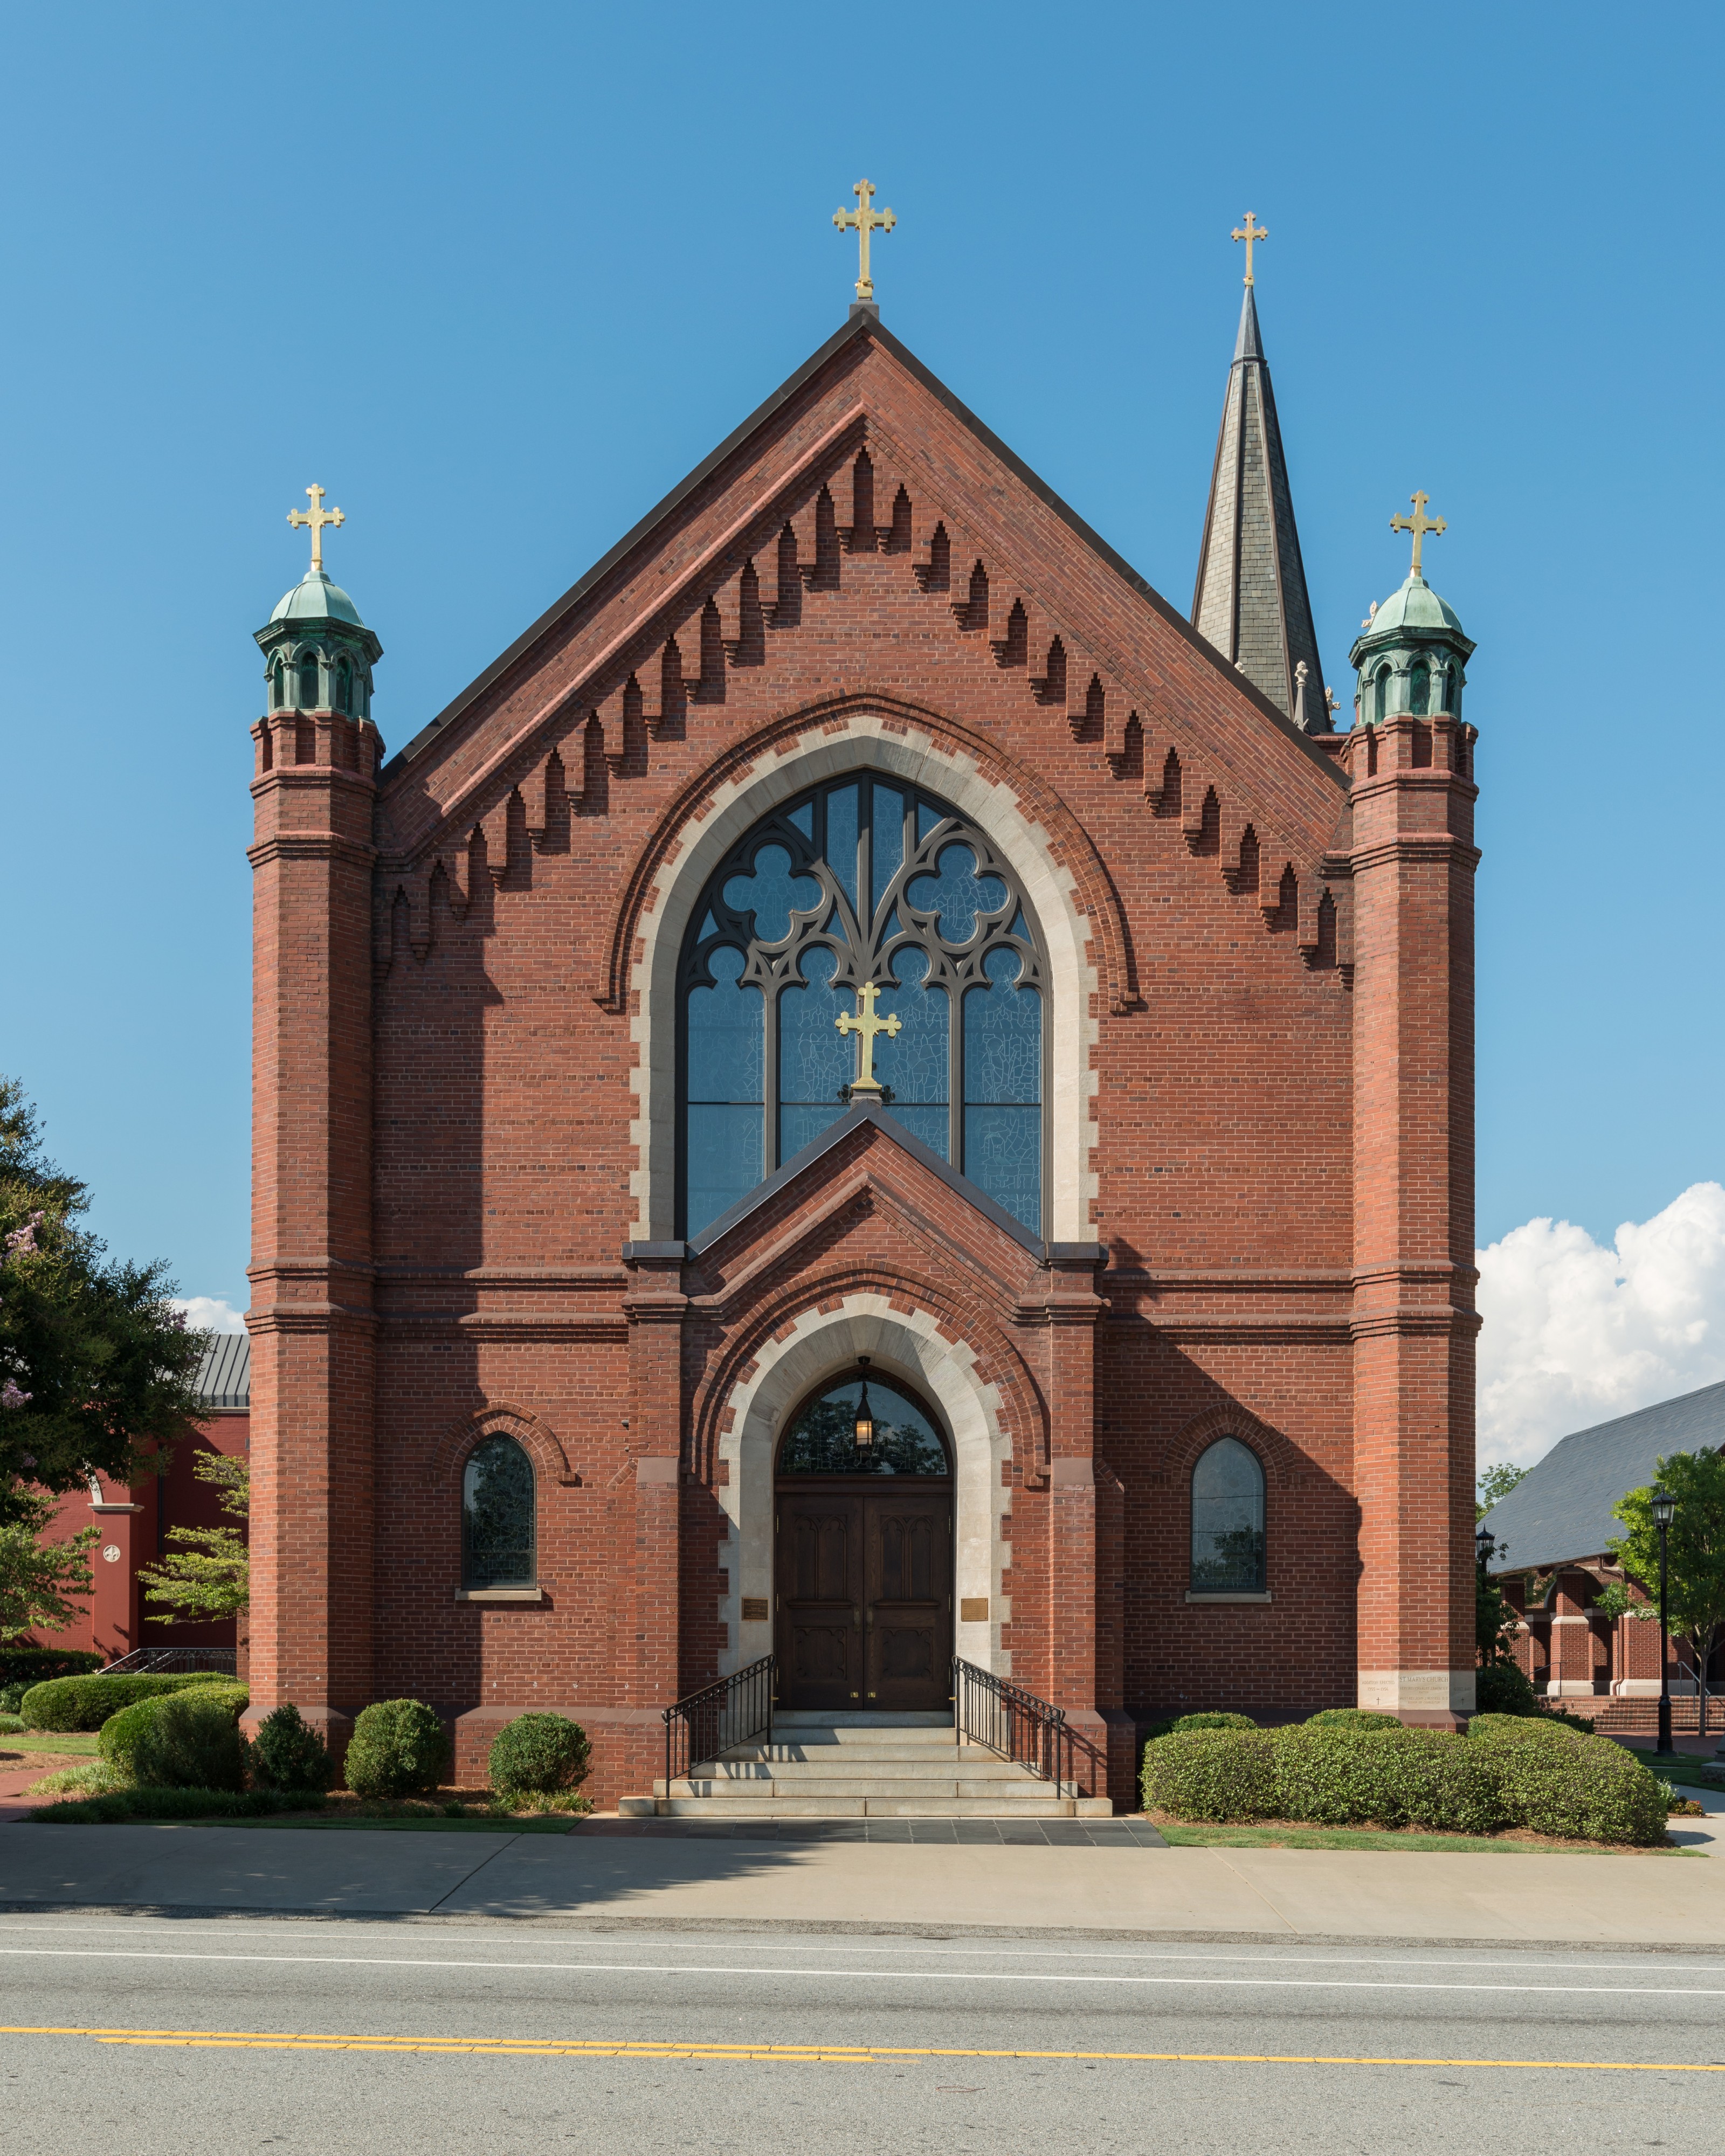 St. Mary's Church, Greenville SC, Southwest view 20160701 1